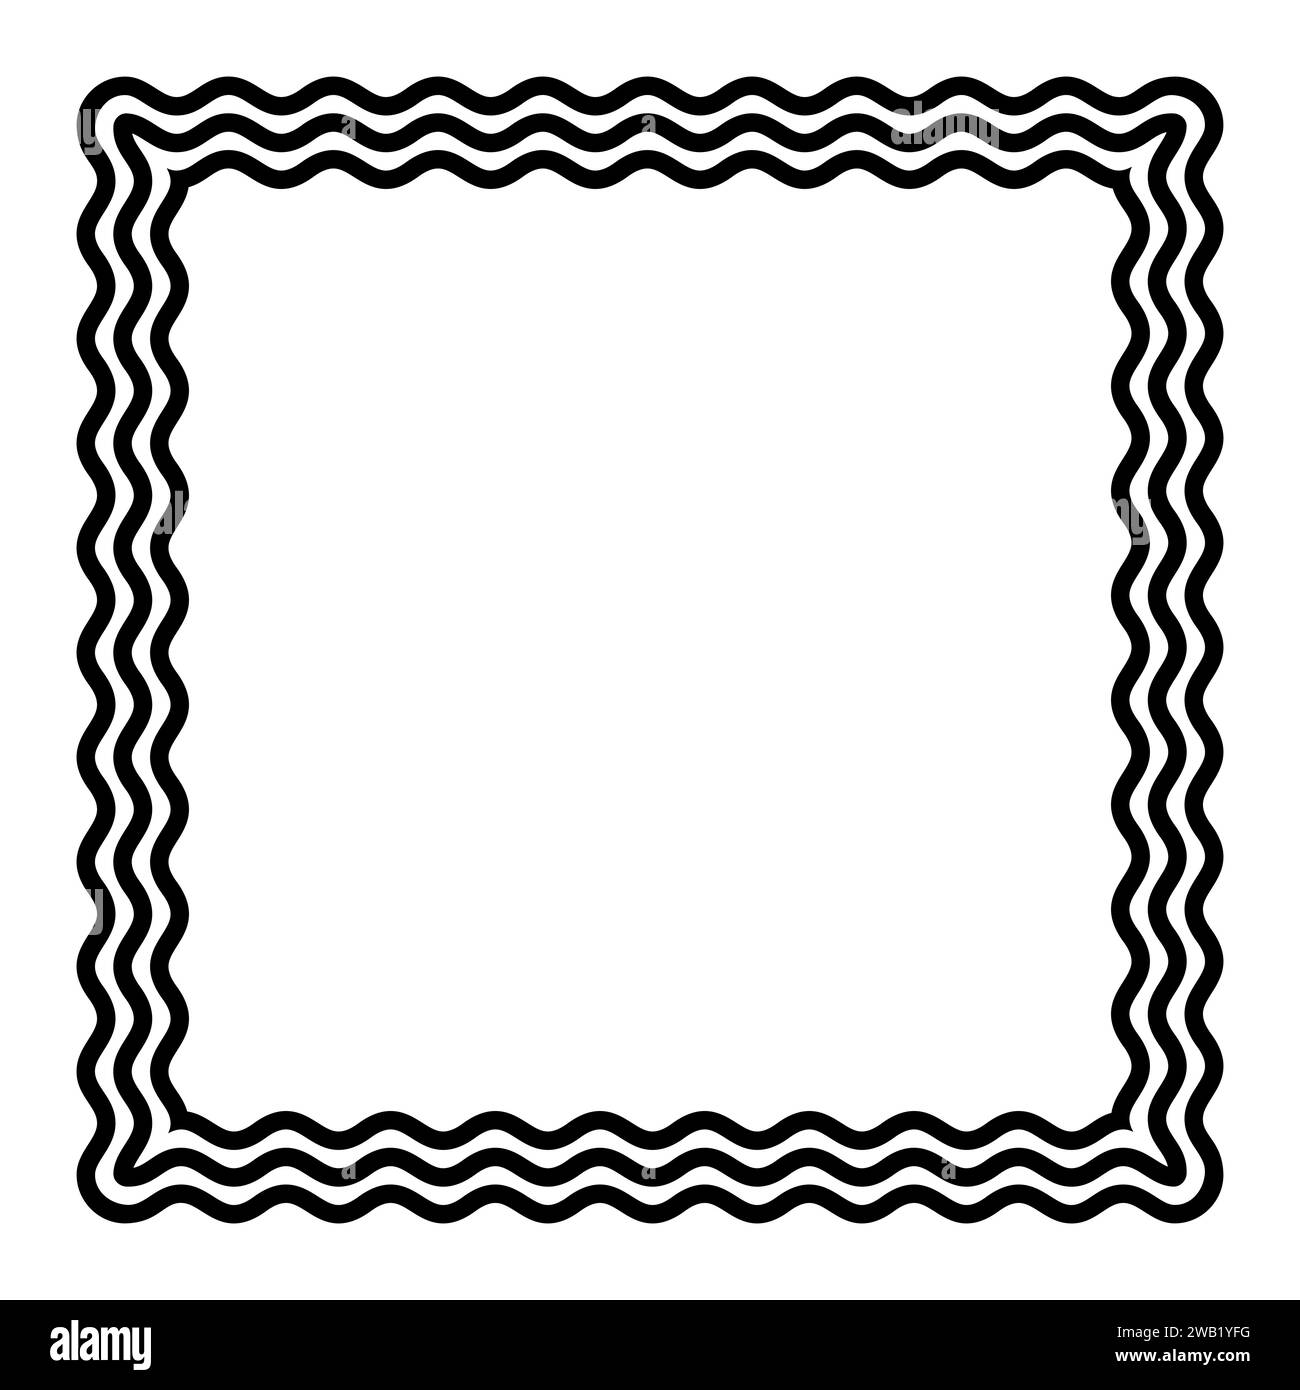 Three bold wavy lines forming a black square shaped frame. Decorative and snake-like border, made by three serpentine lines. Stock Photo